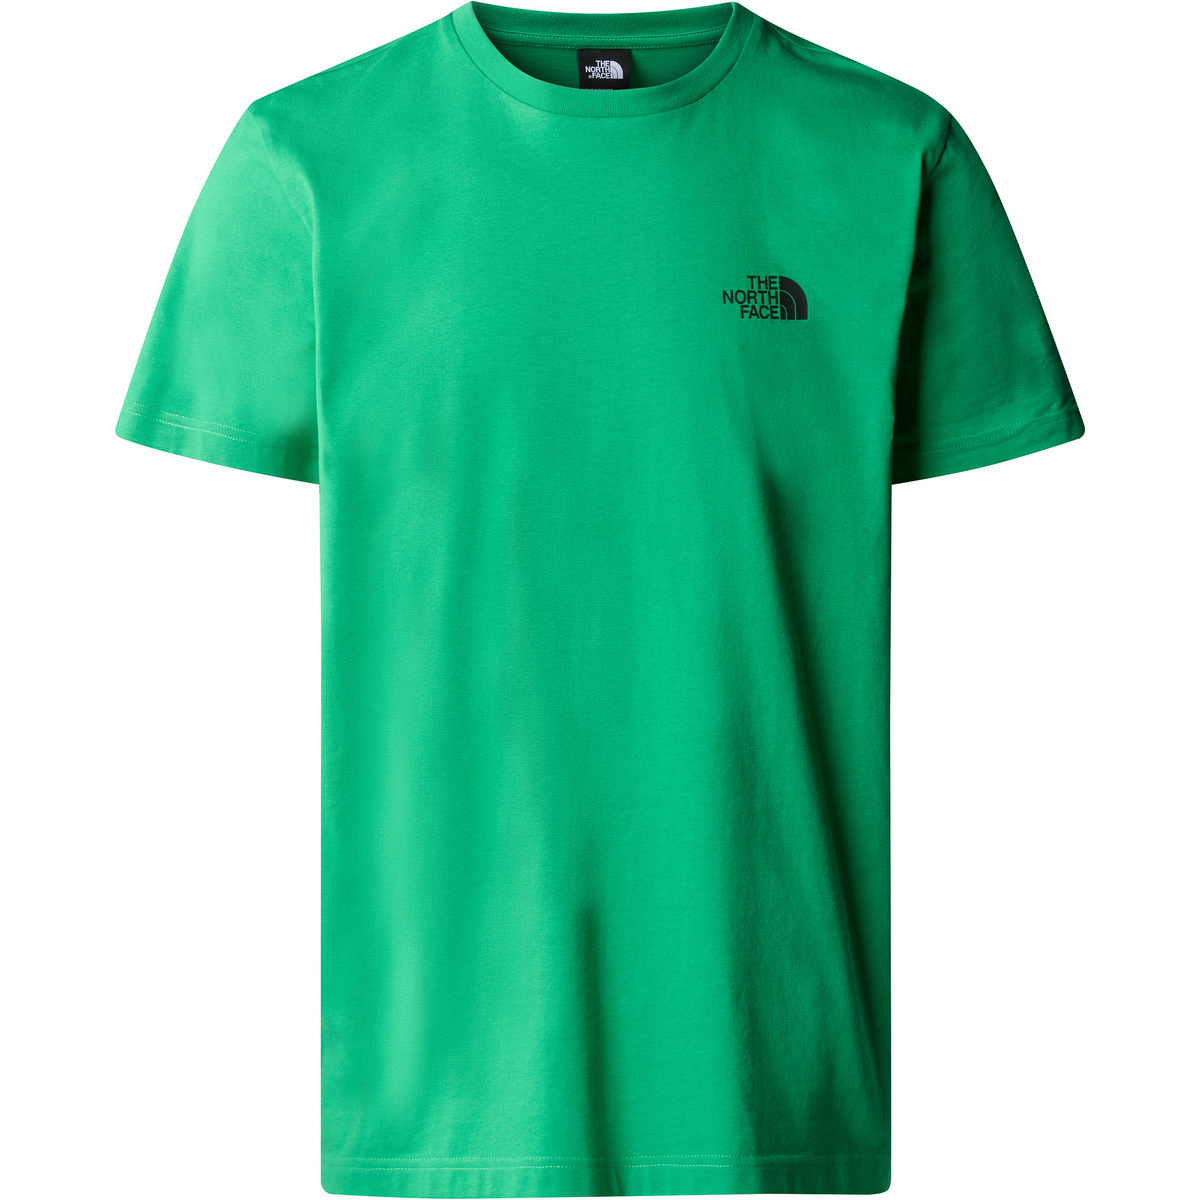 The North Face Herren Simple Dome T-Shirt von The North Face